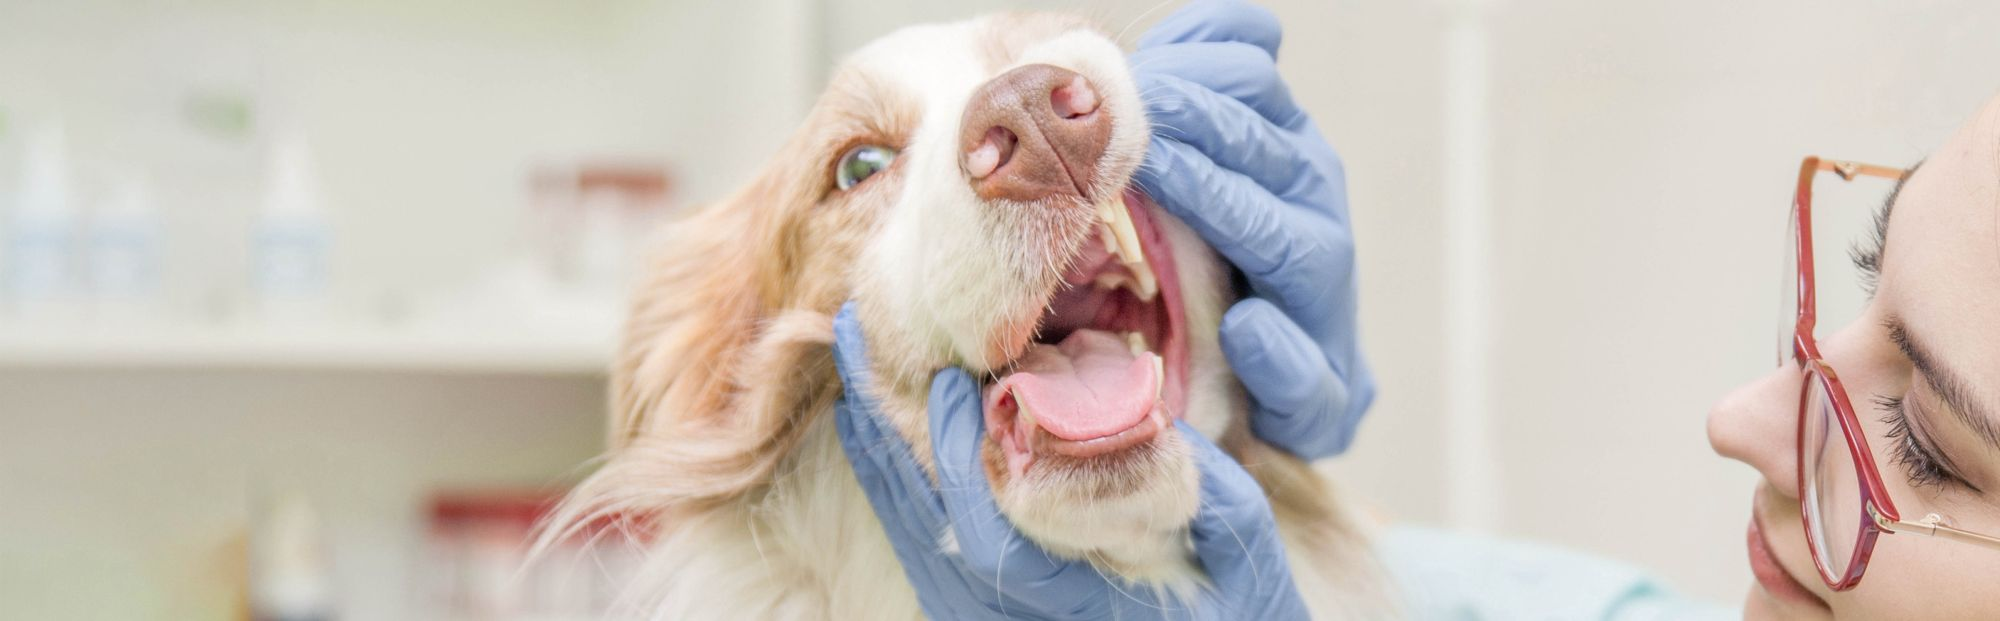 Dog getting their teeth checked by a veterinarian